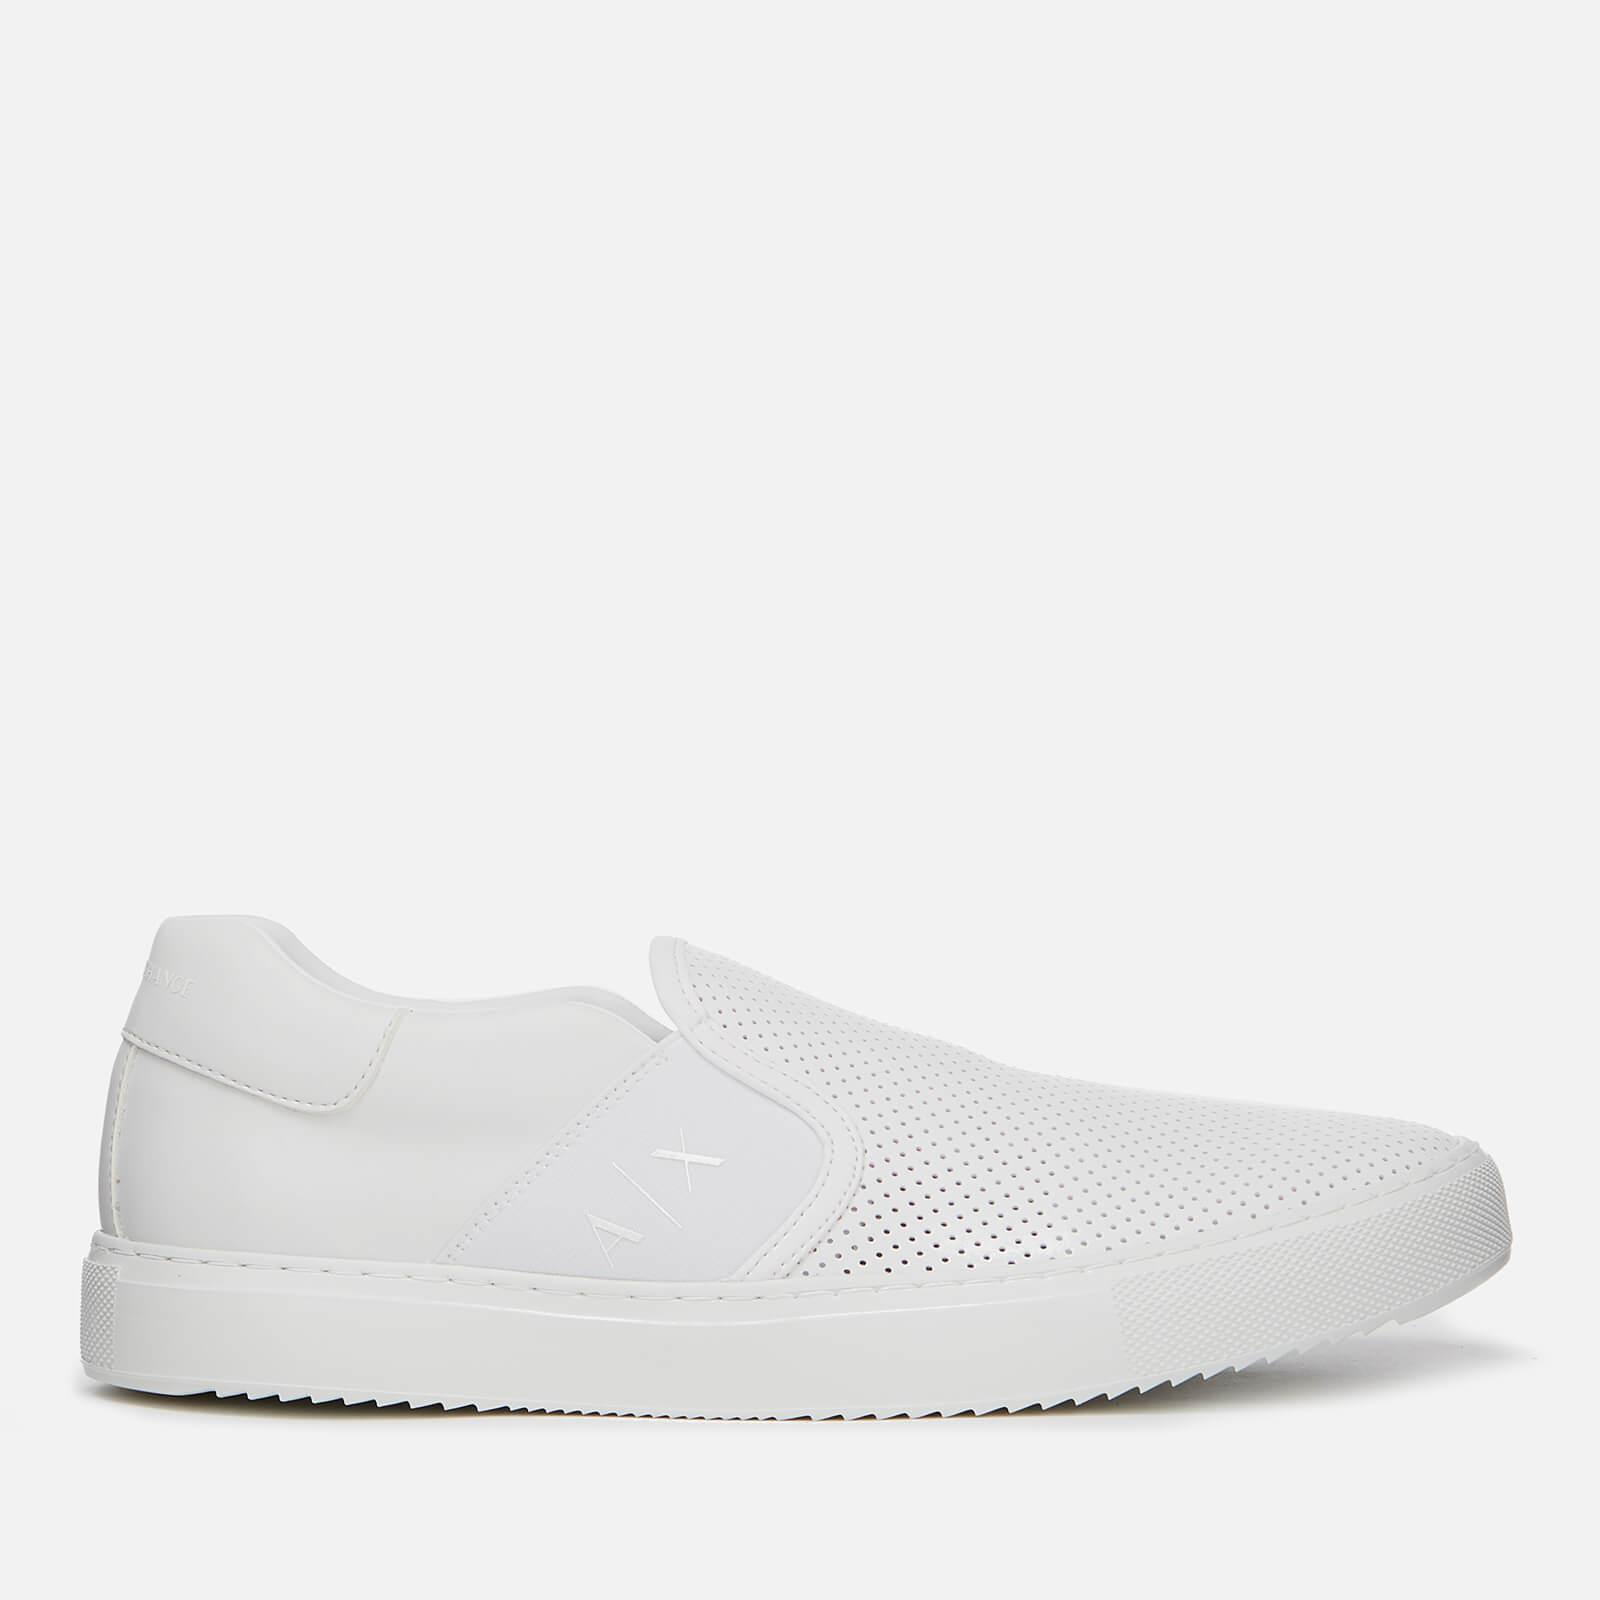 Armani Exchange Slip-on Trainers in White for Men - Lyst